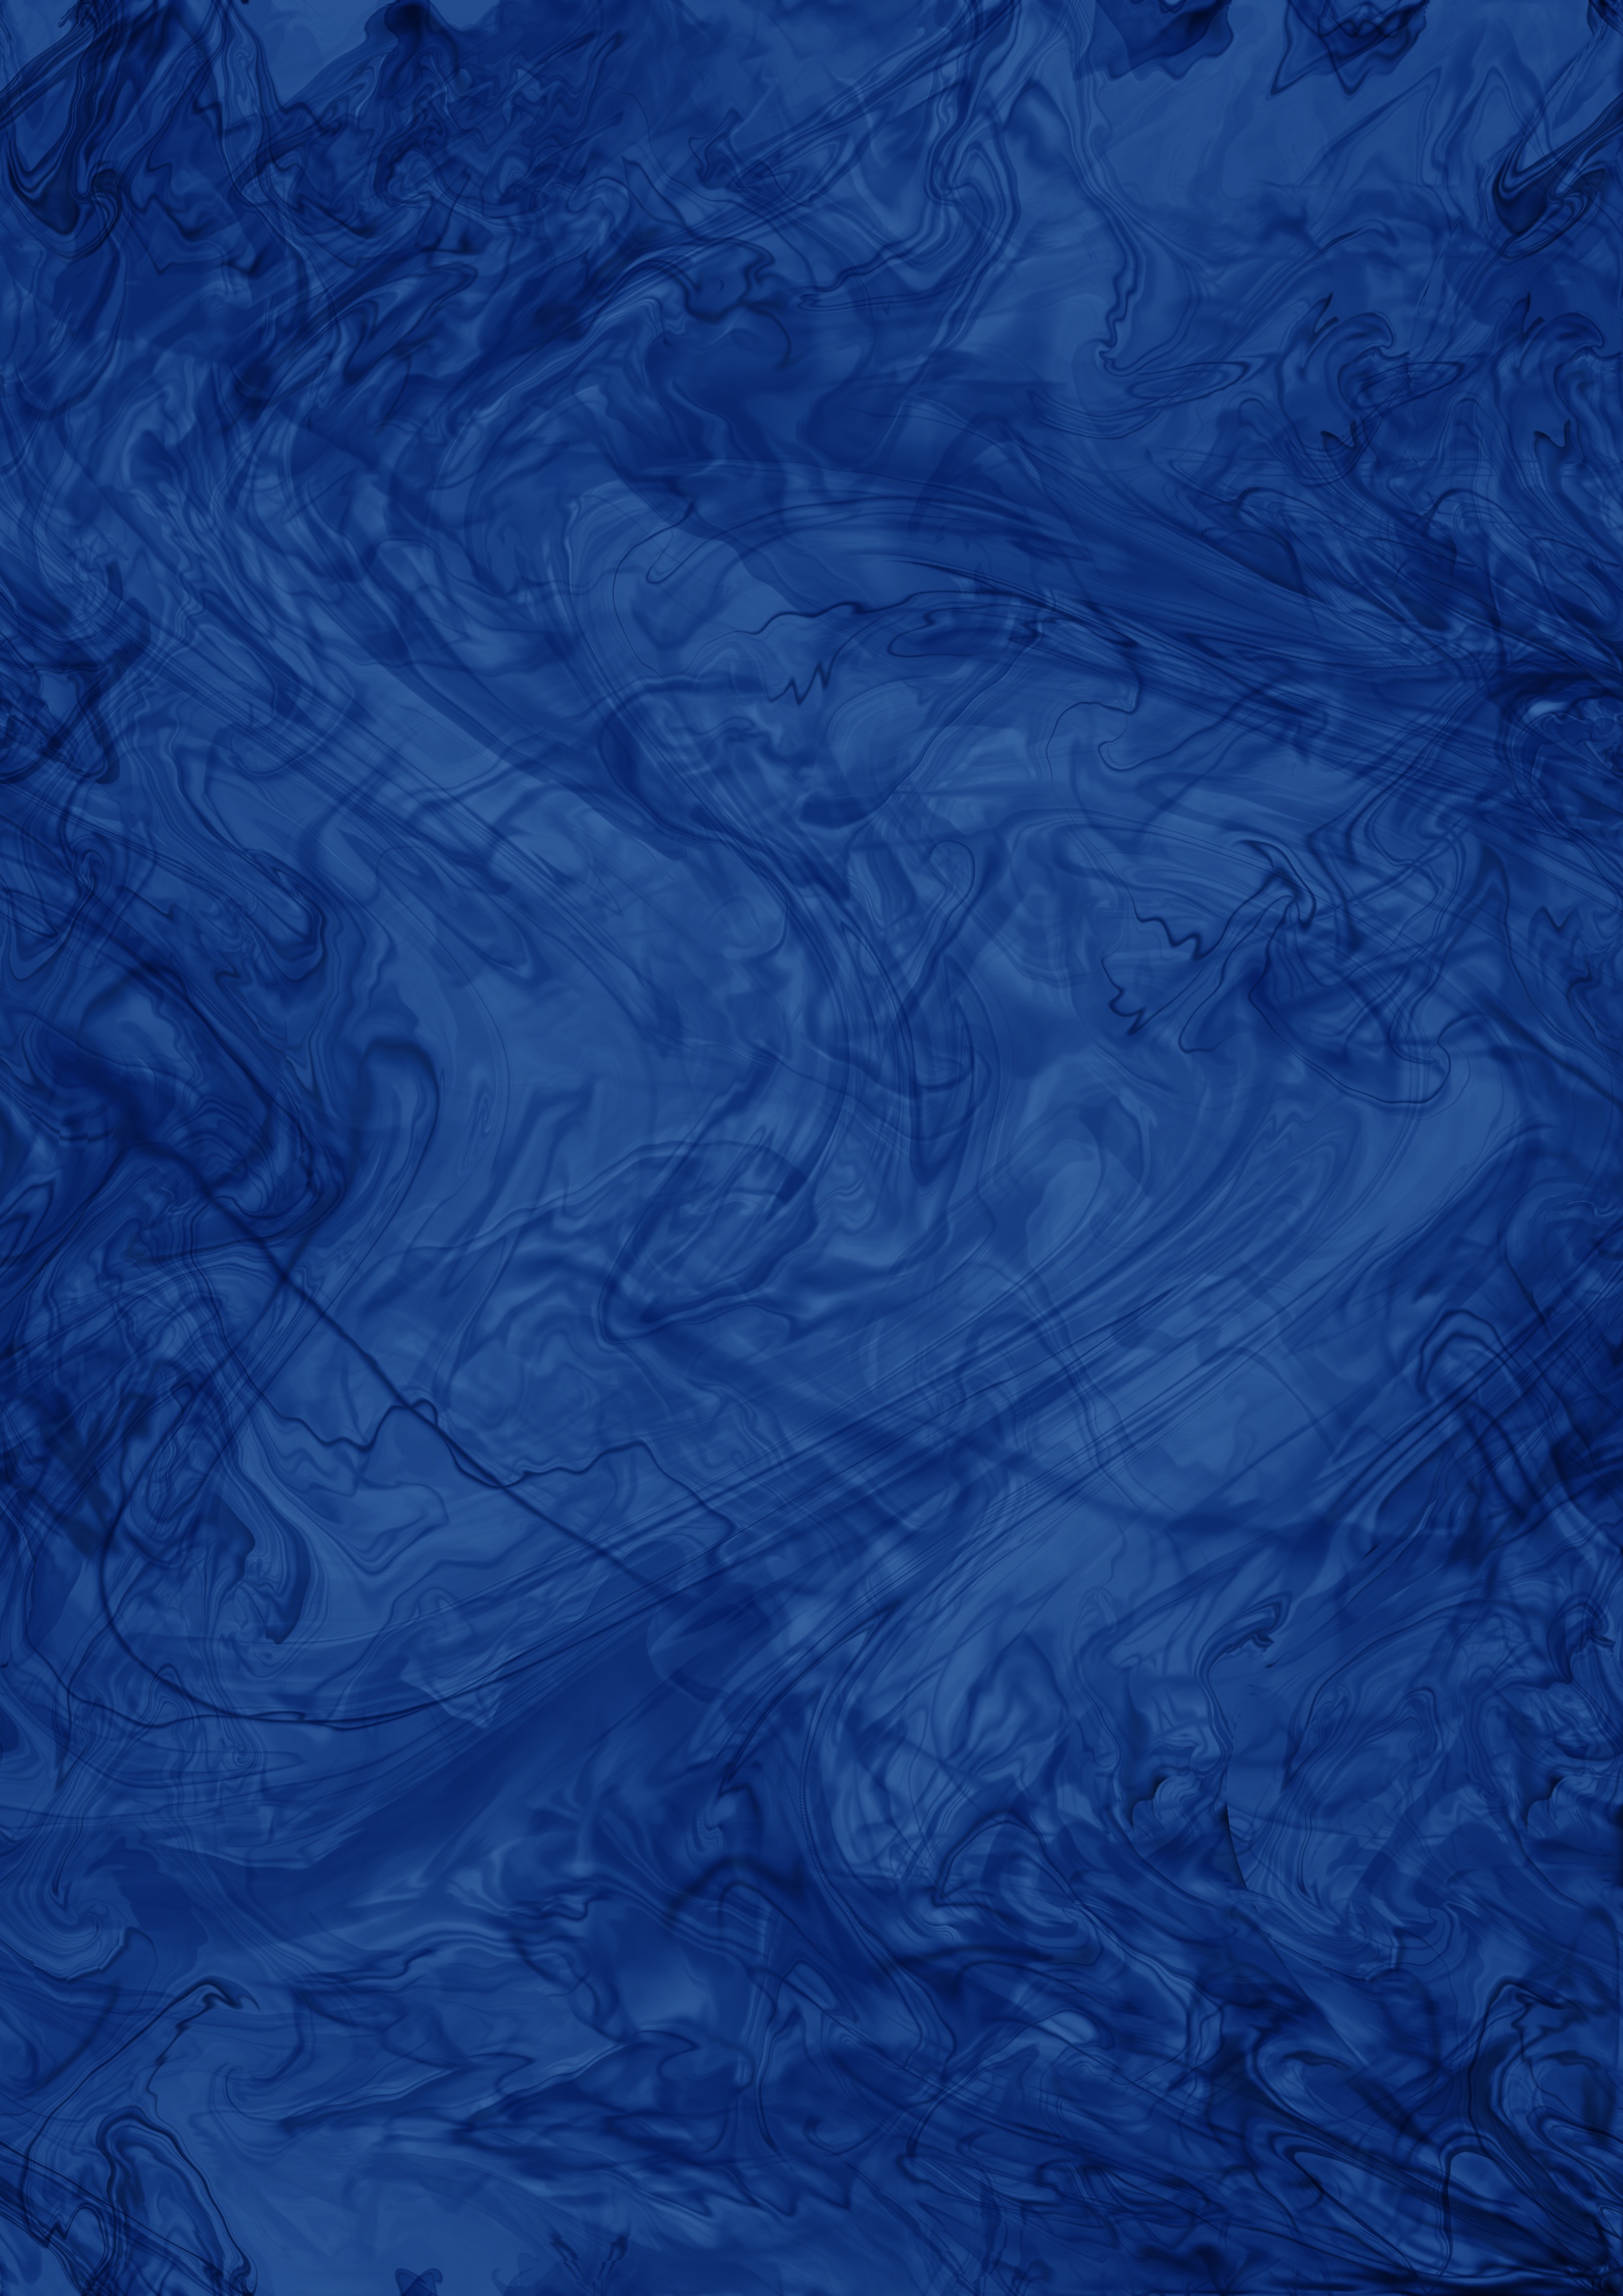 111317 download wallpaper blue, textures, liquid, smoke, texture, granite screensavers and pictures for free